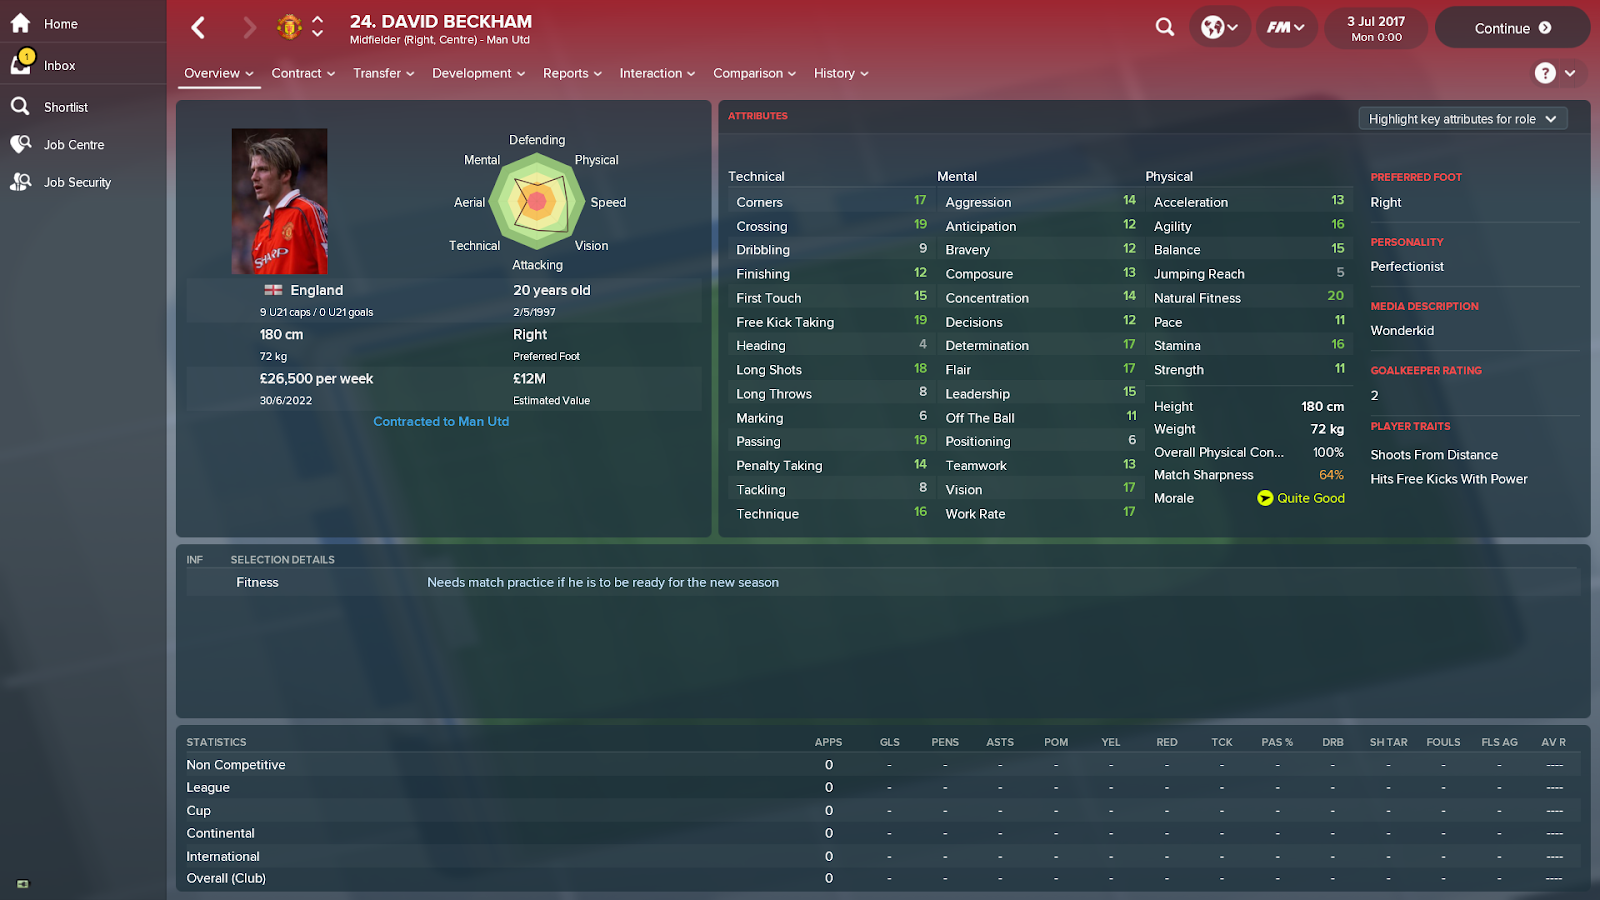 Football manager 2018 best players